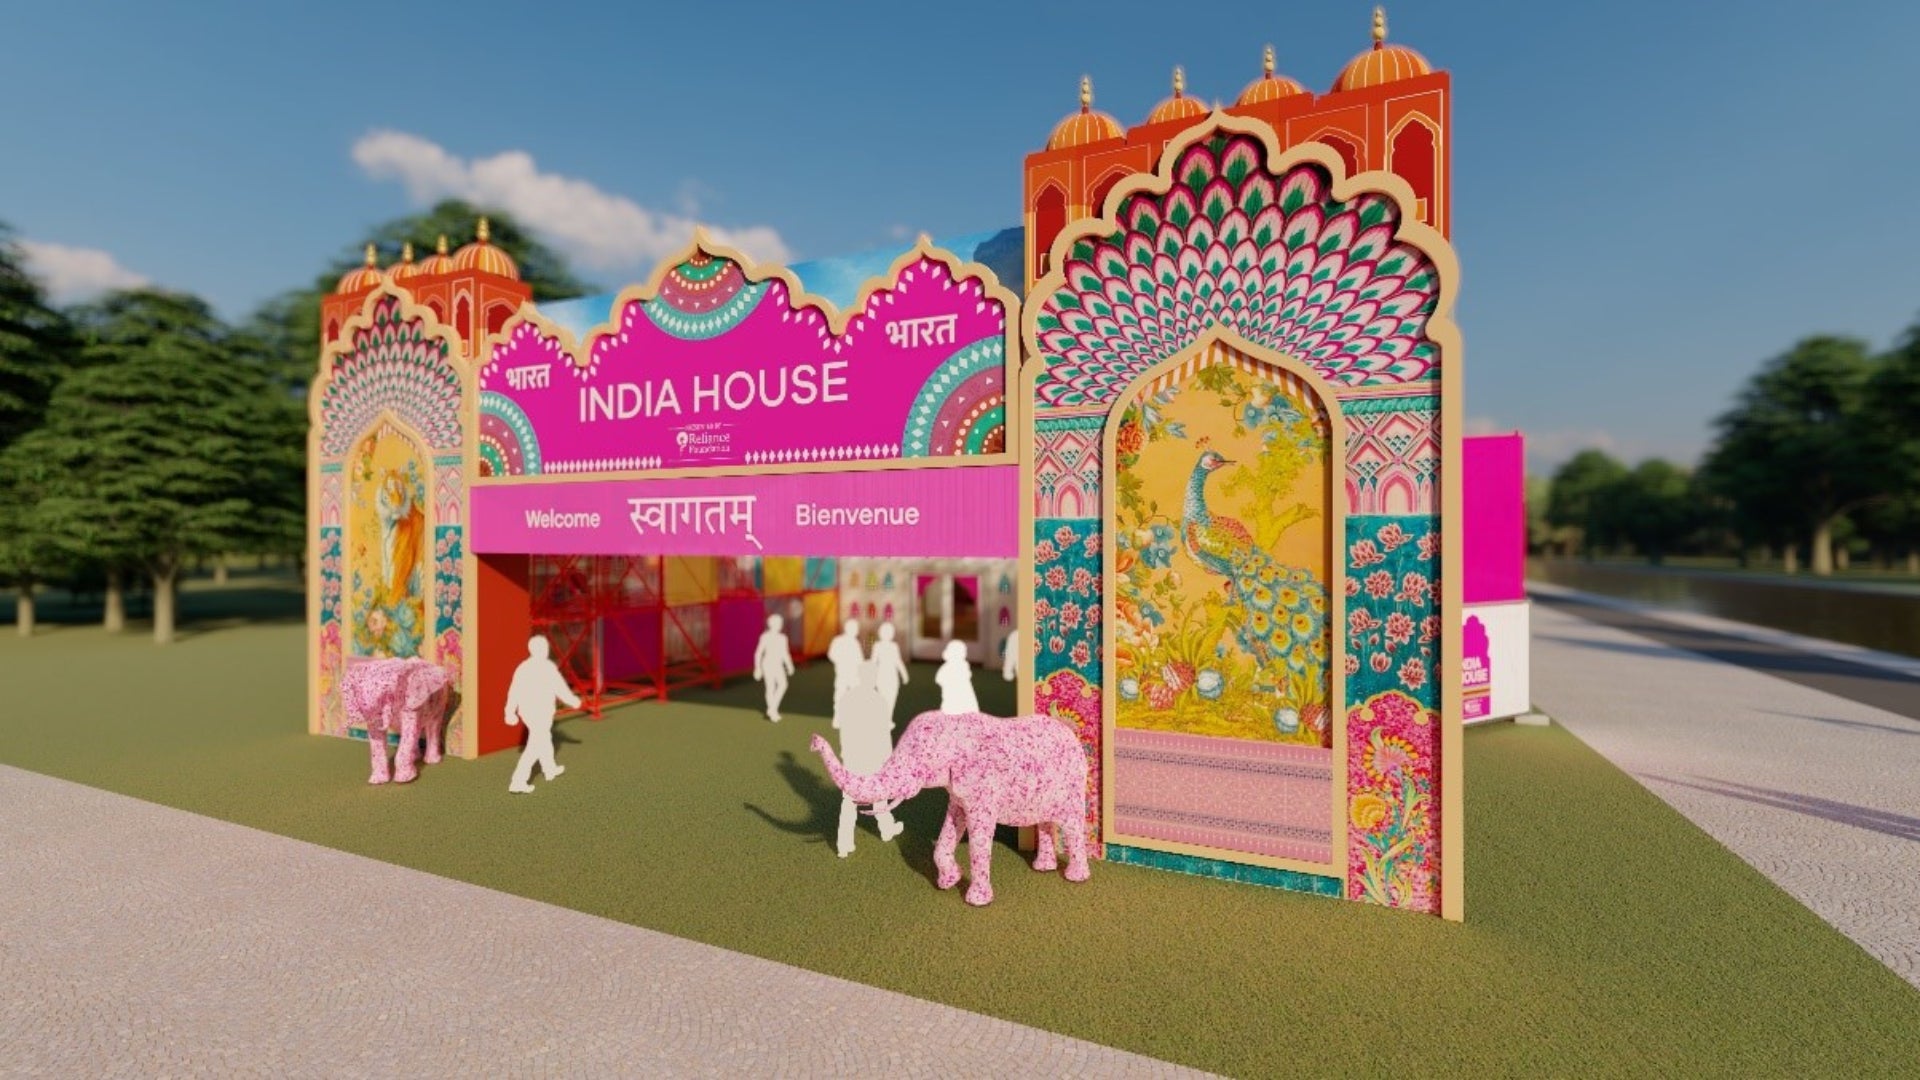 India House in Paris 2024 Olympics: A Celebration of India’s Culture and Sports